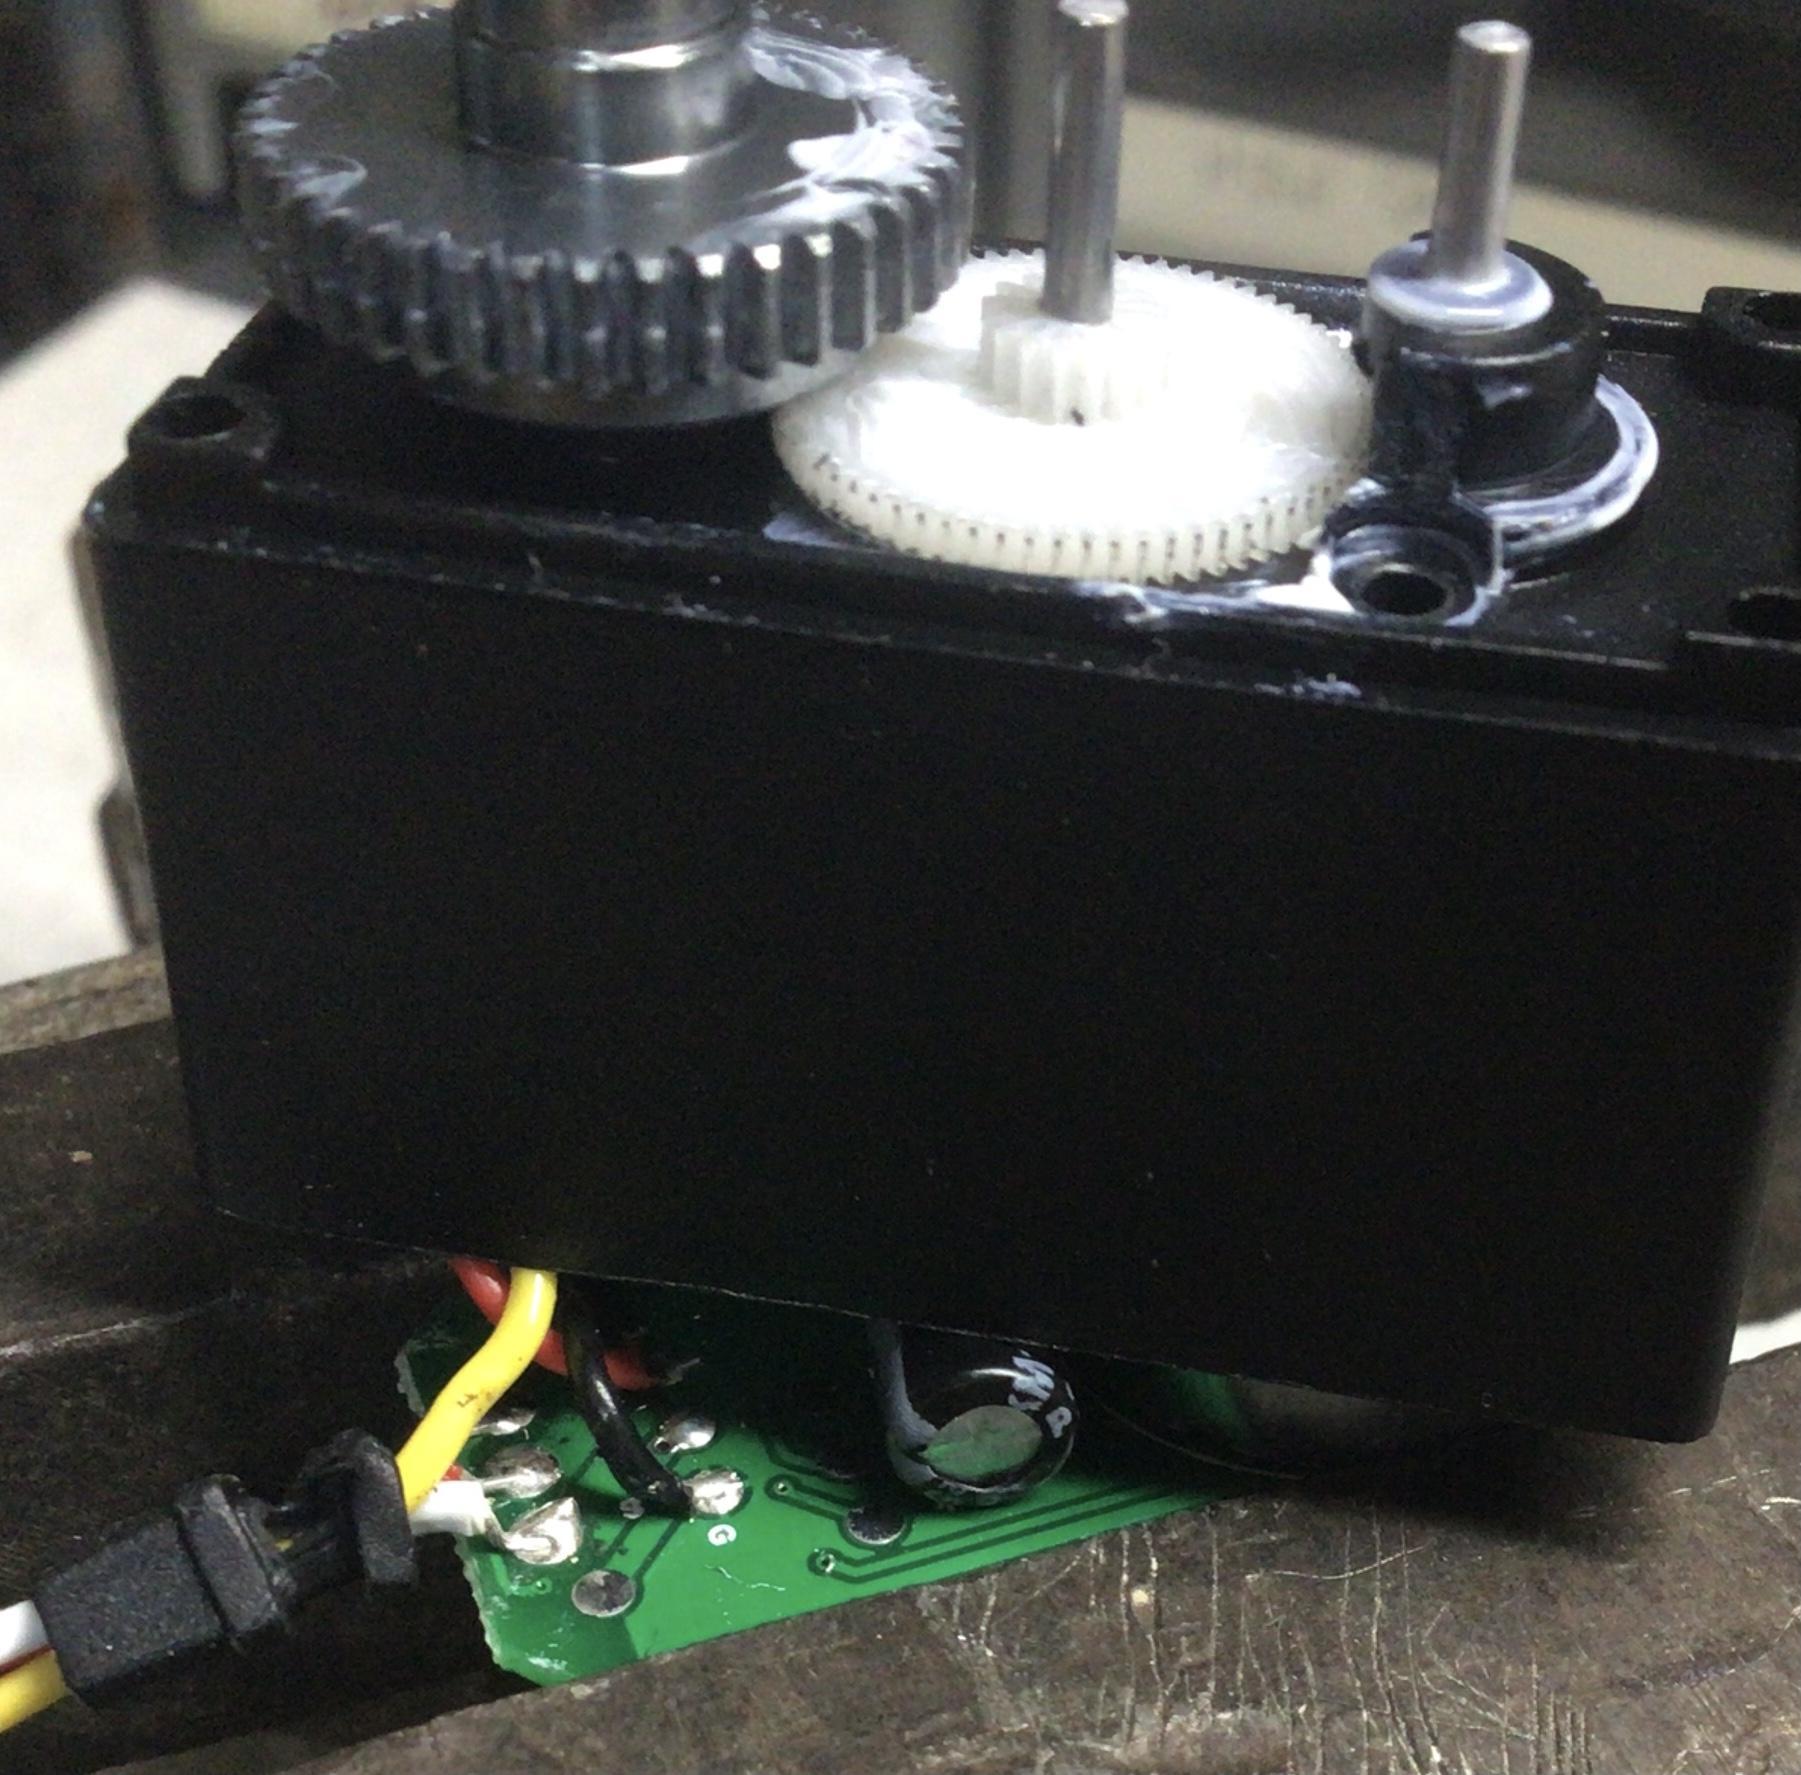 Feedback 360 motor clamped in a vise with circuit board partially removed and at an angle